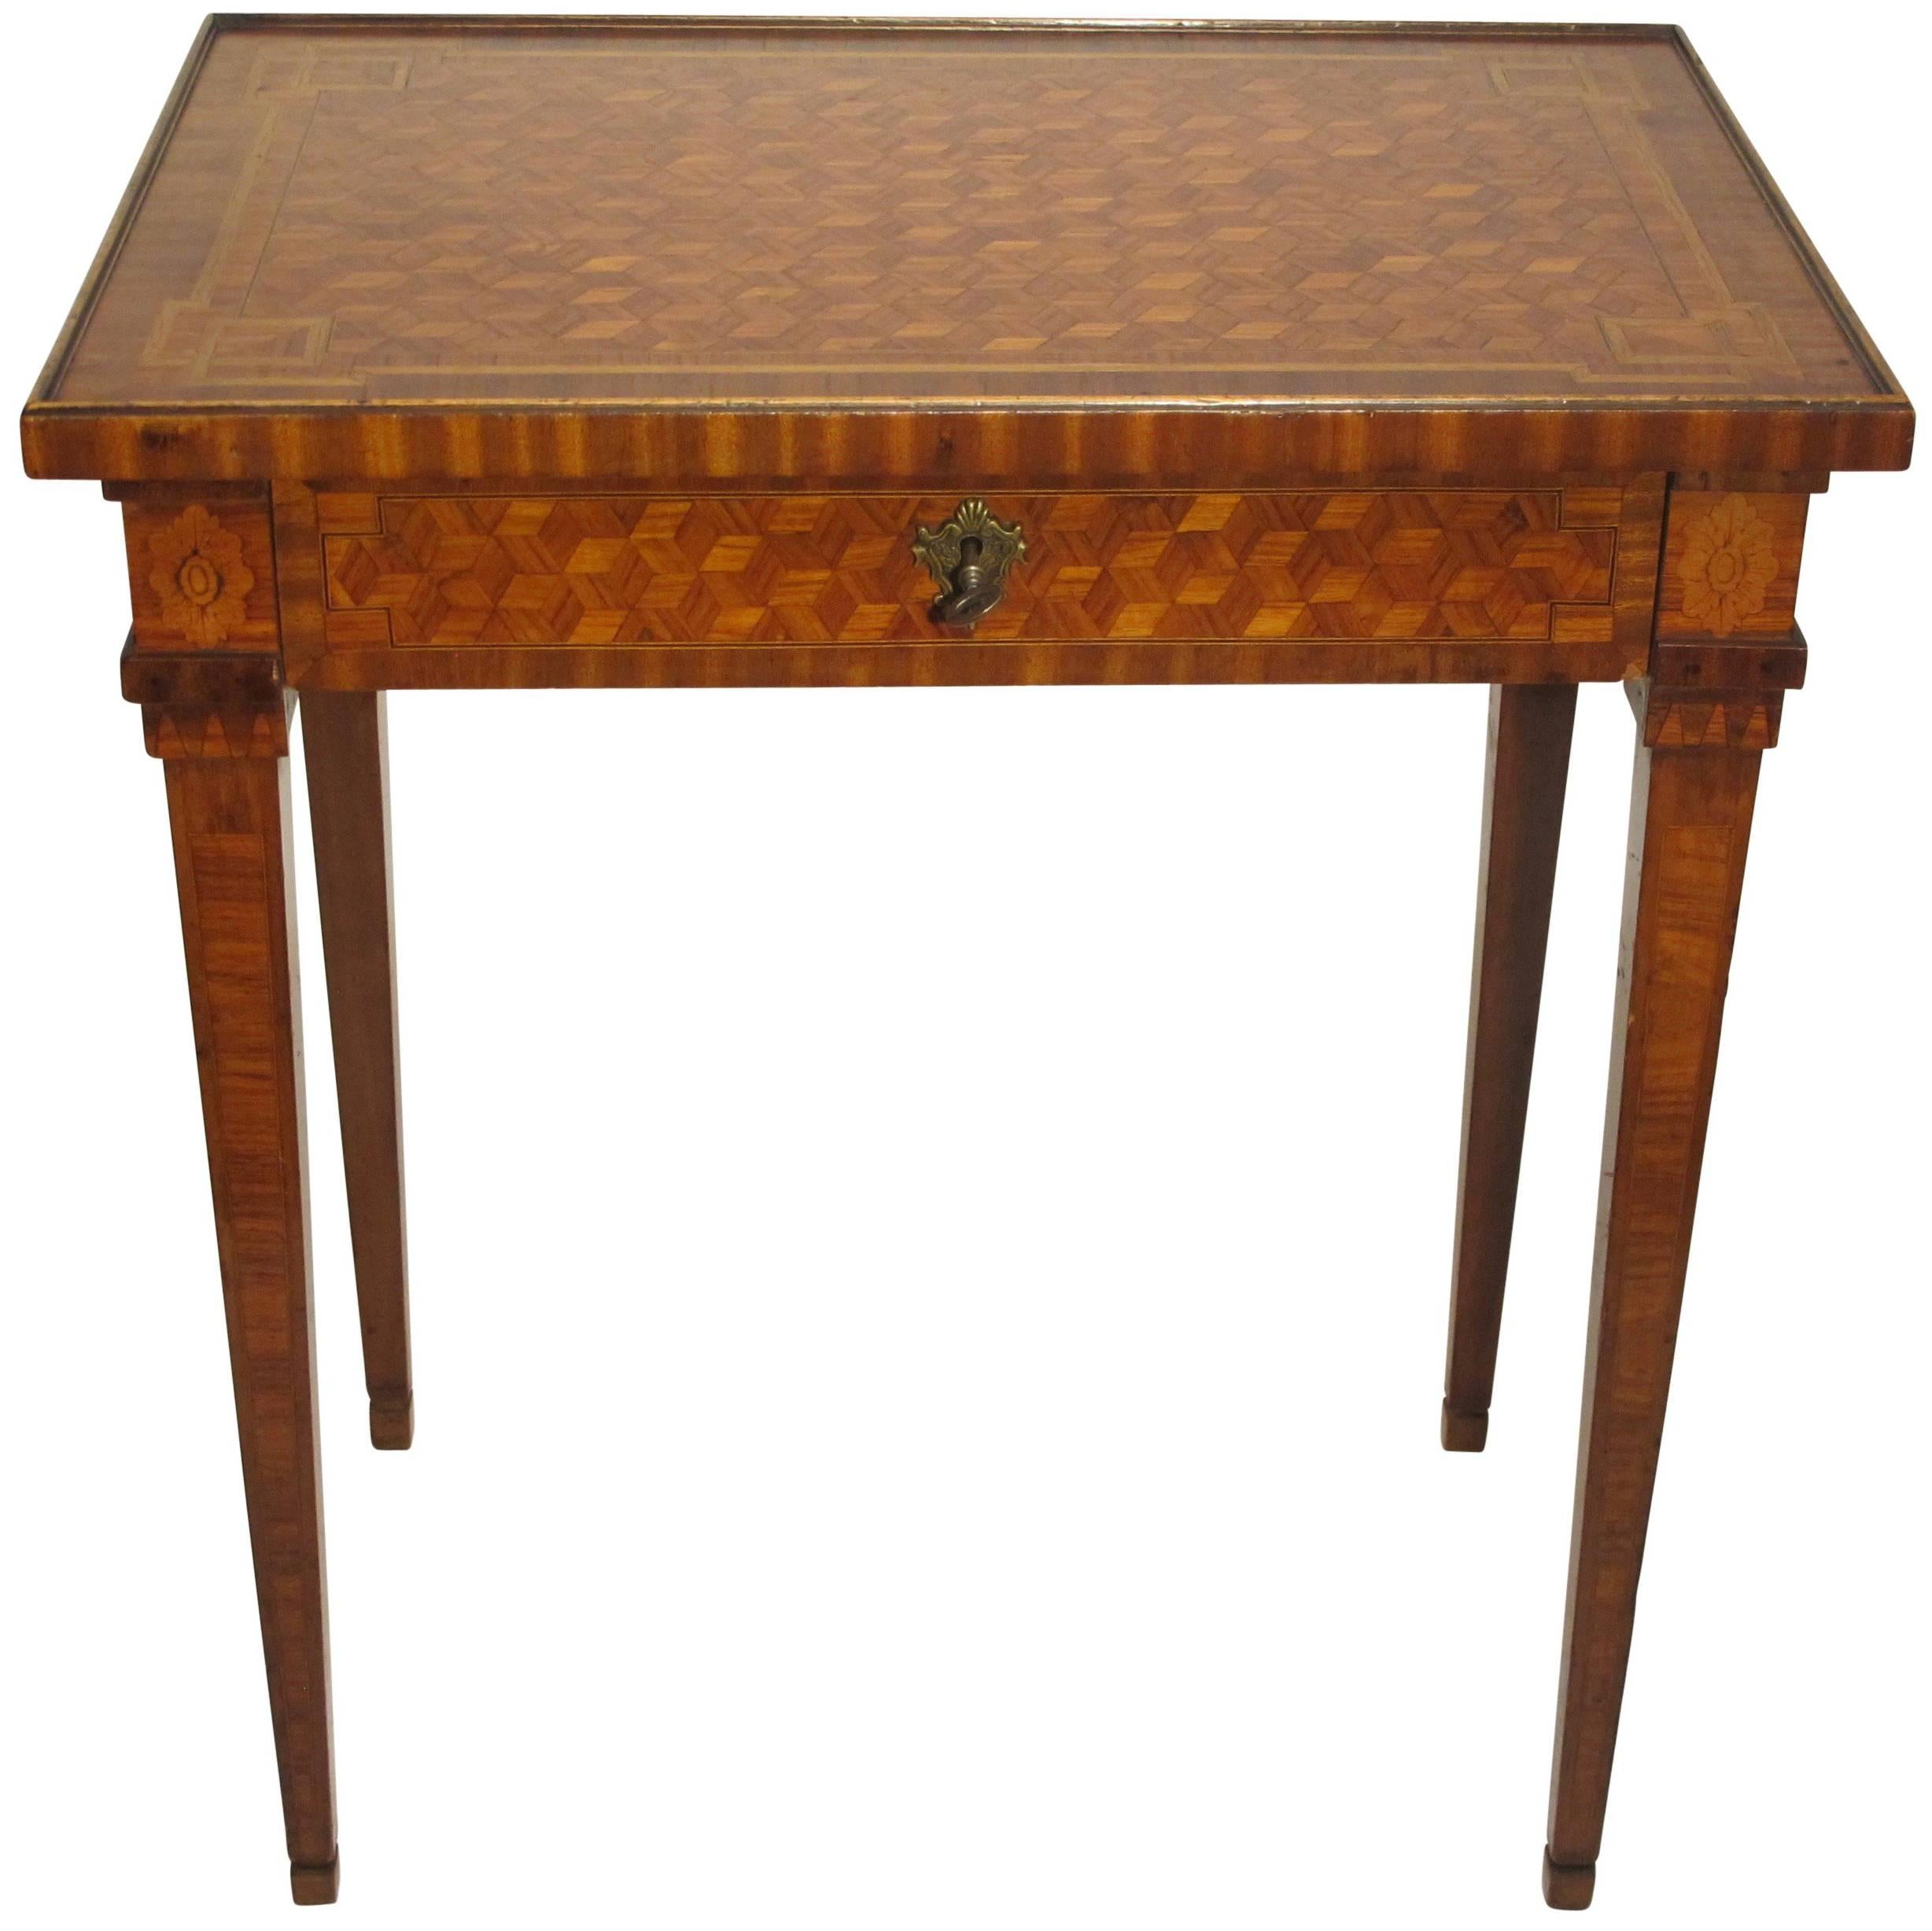 Walnut and Mixed Fruitwood Parquetry Side Table, French, 18th Century For Sale